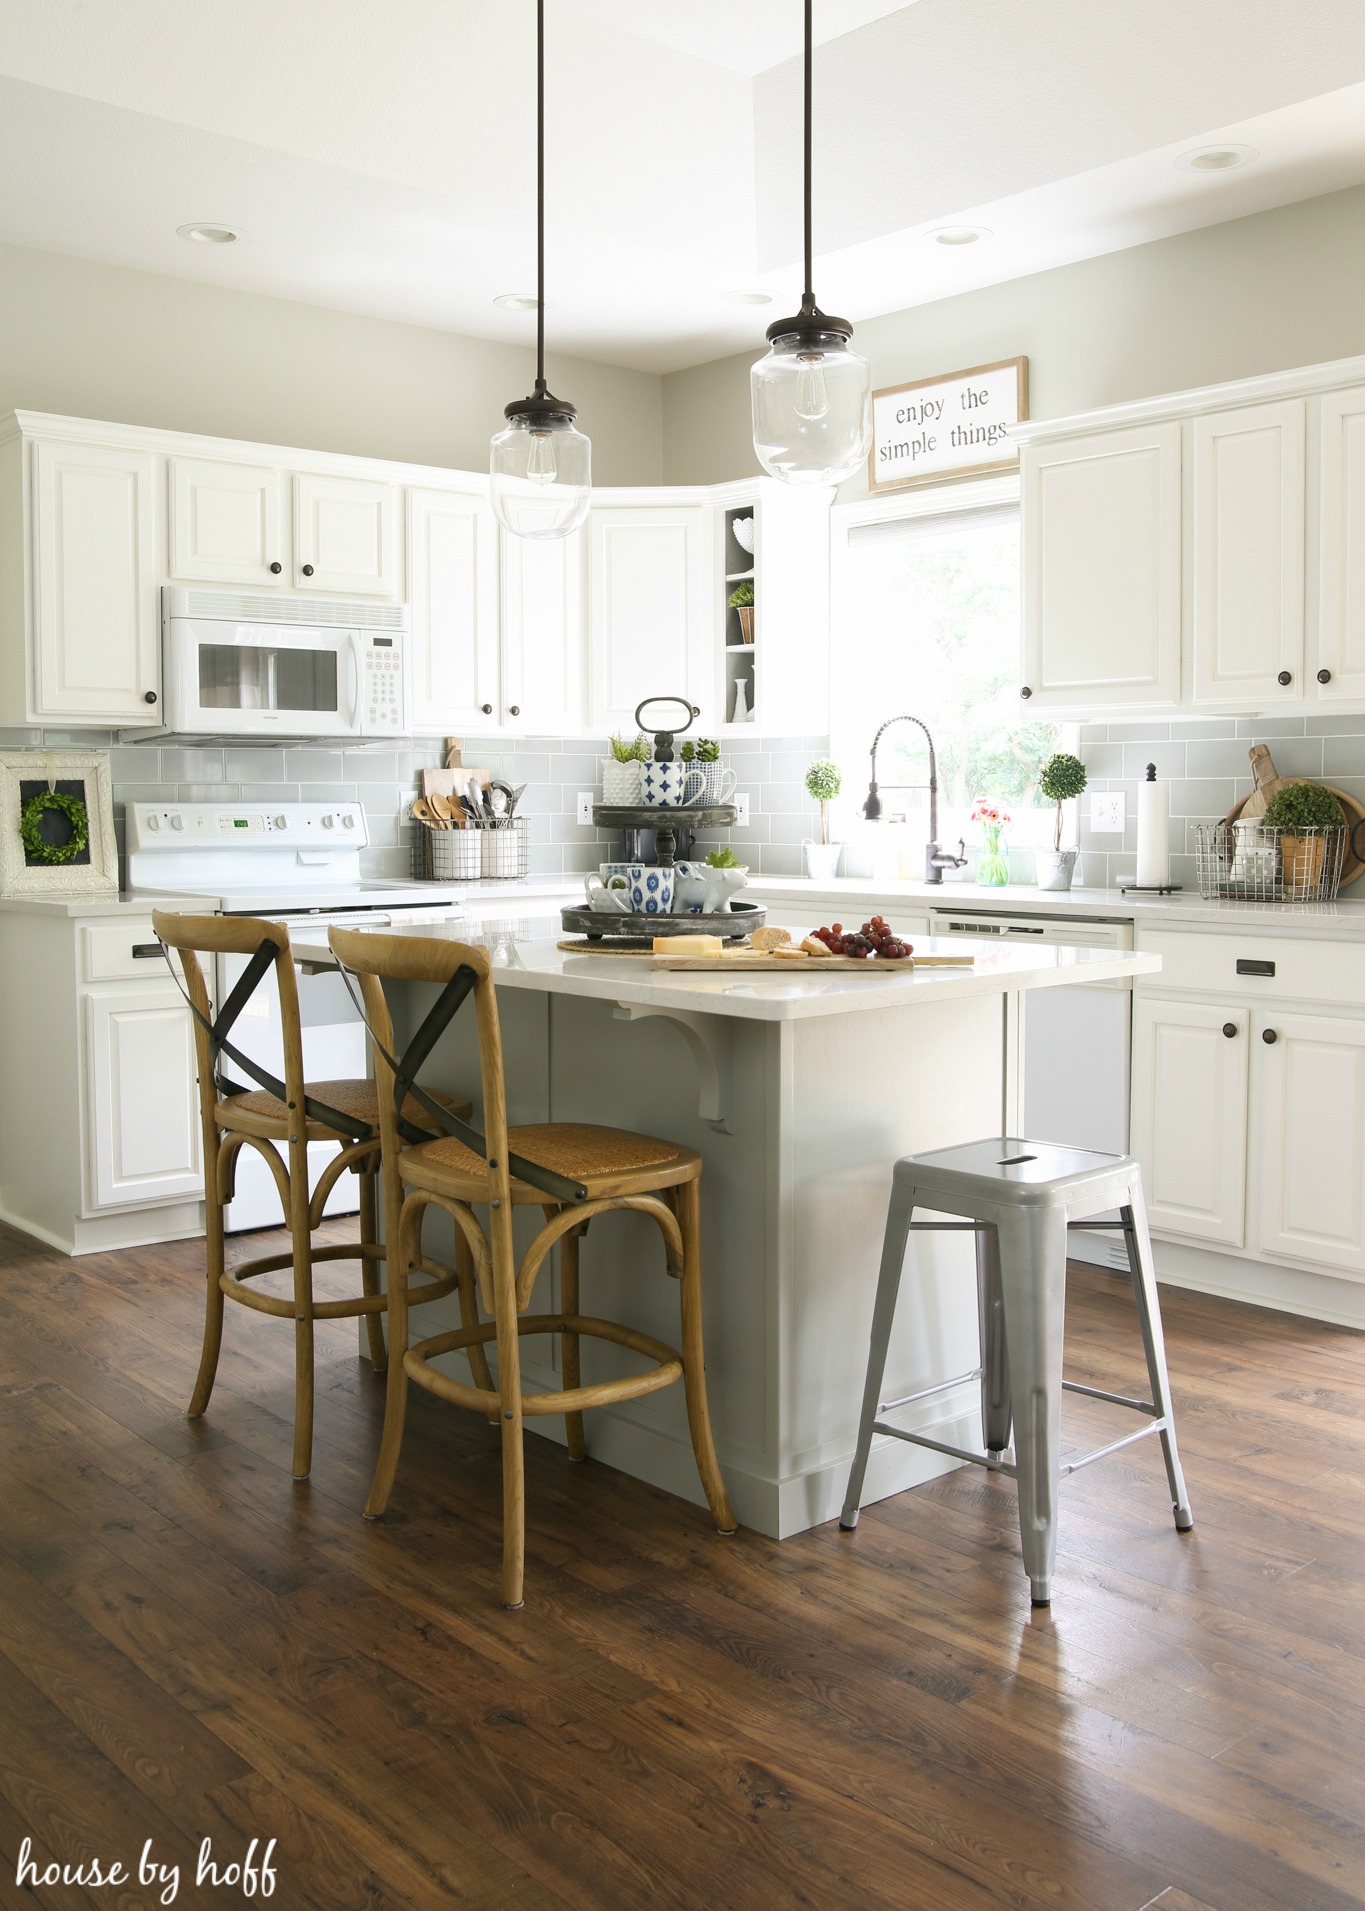 10 Fab Farmhouse Kitchen Makeovers Where They Painted The